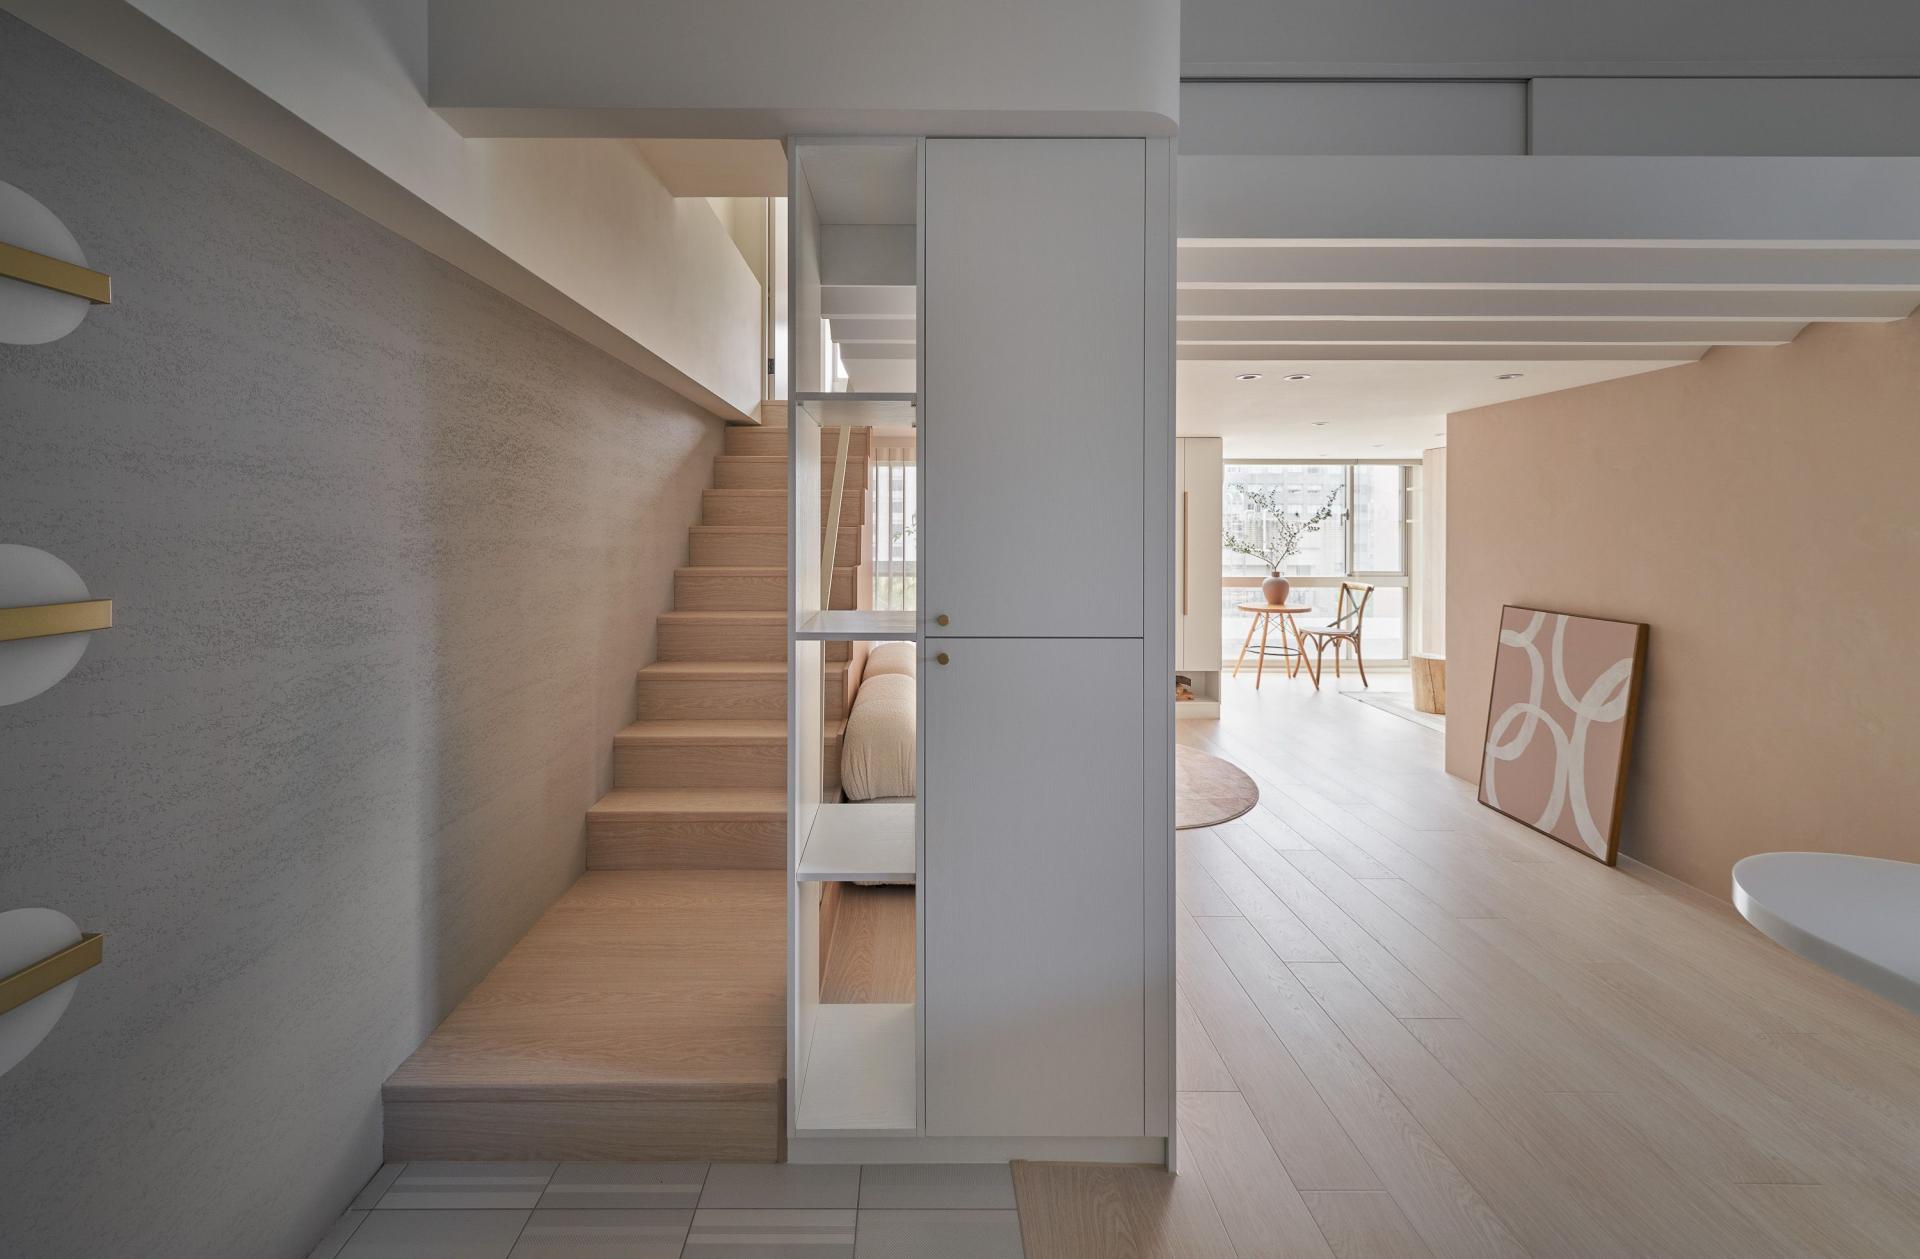 Inside a 419 sq. ft. home in Taipei that masters 